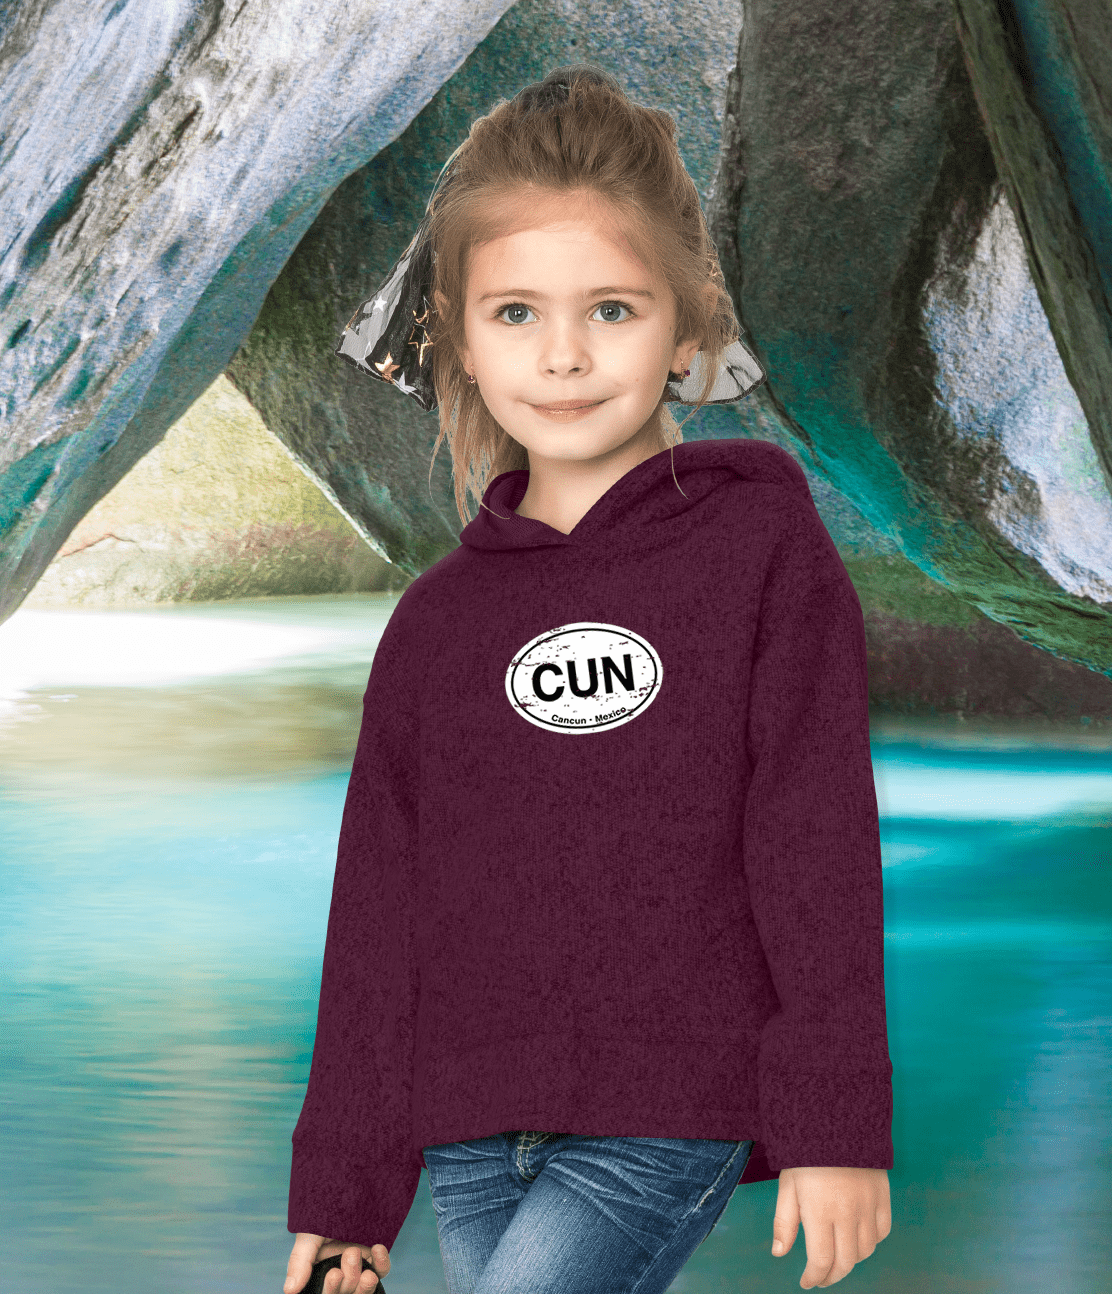 Cancun Classic Youth Hoodie - My Destination Location